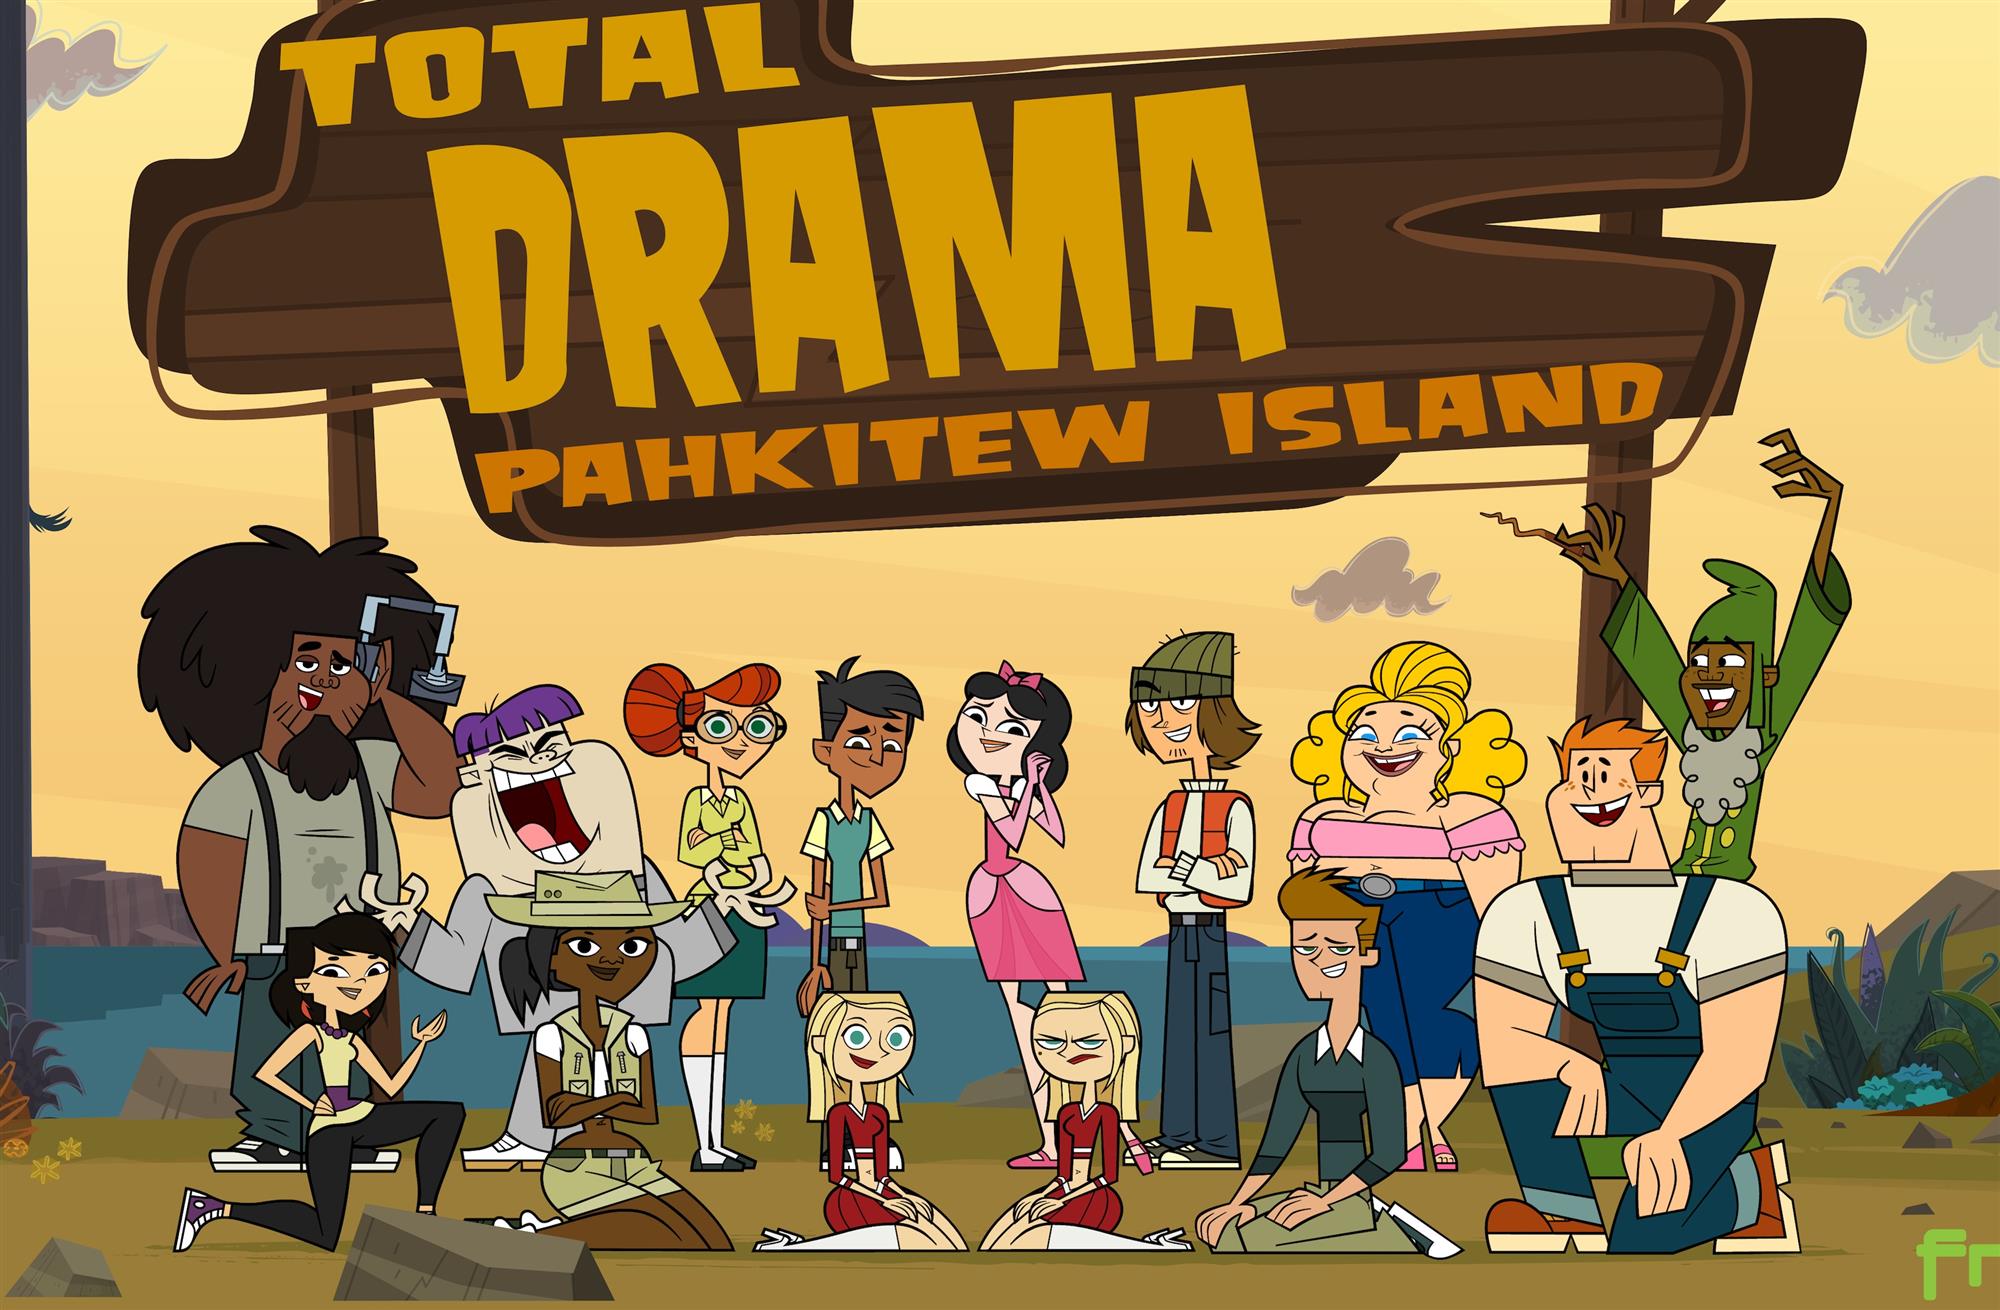 Category:Total Drama characters | Fictional Characters Wiki | FANDOM